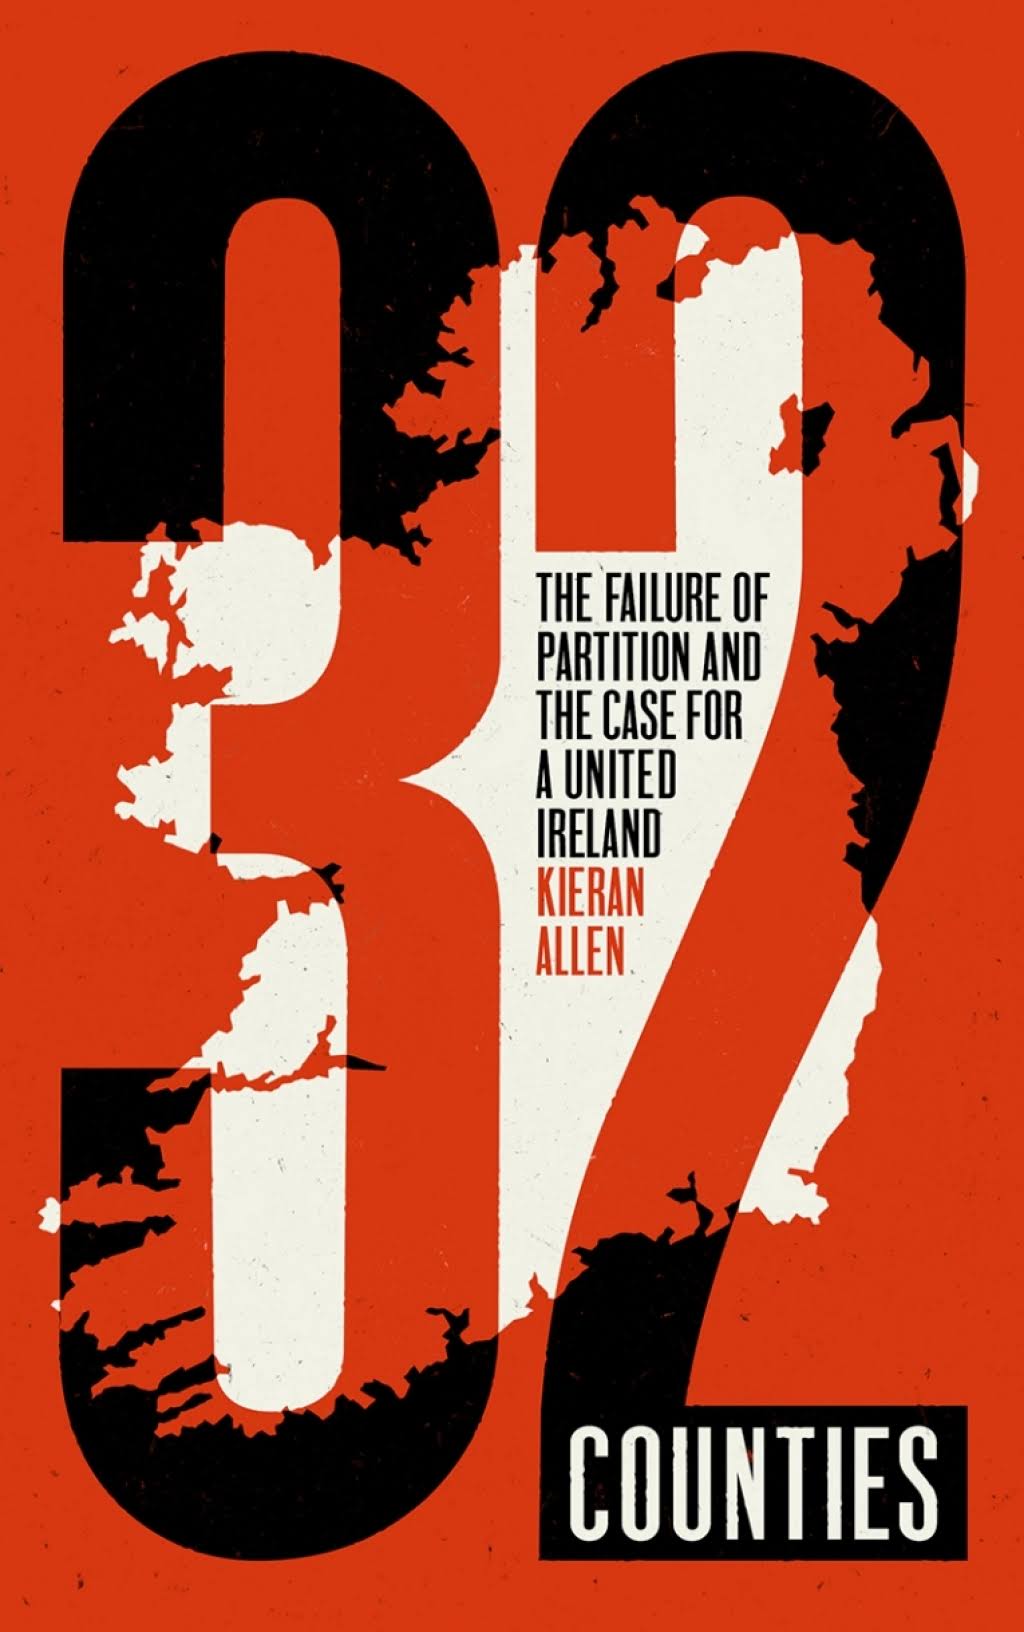 32 Counties: The Failure of Partition and the Case for a United Ireland [Book]